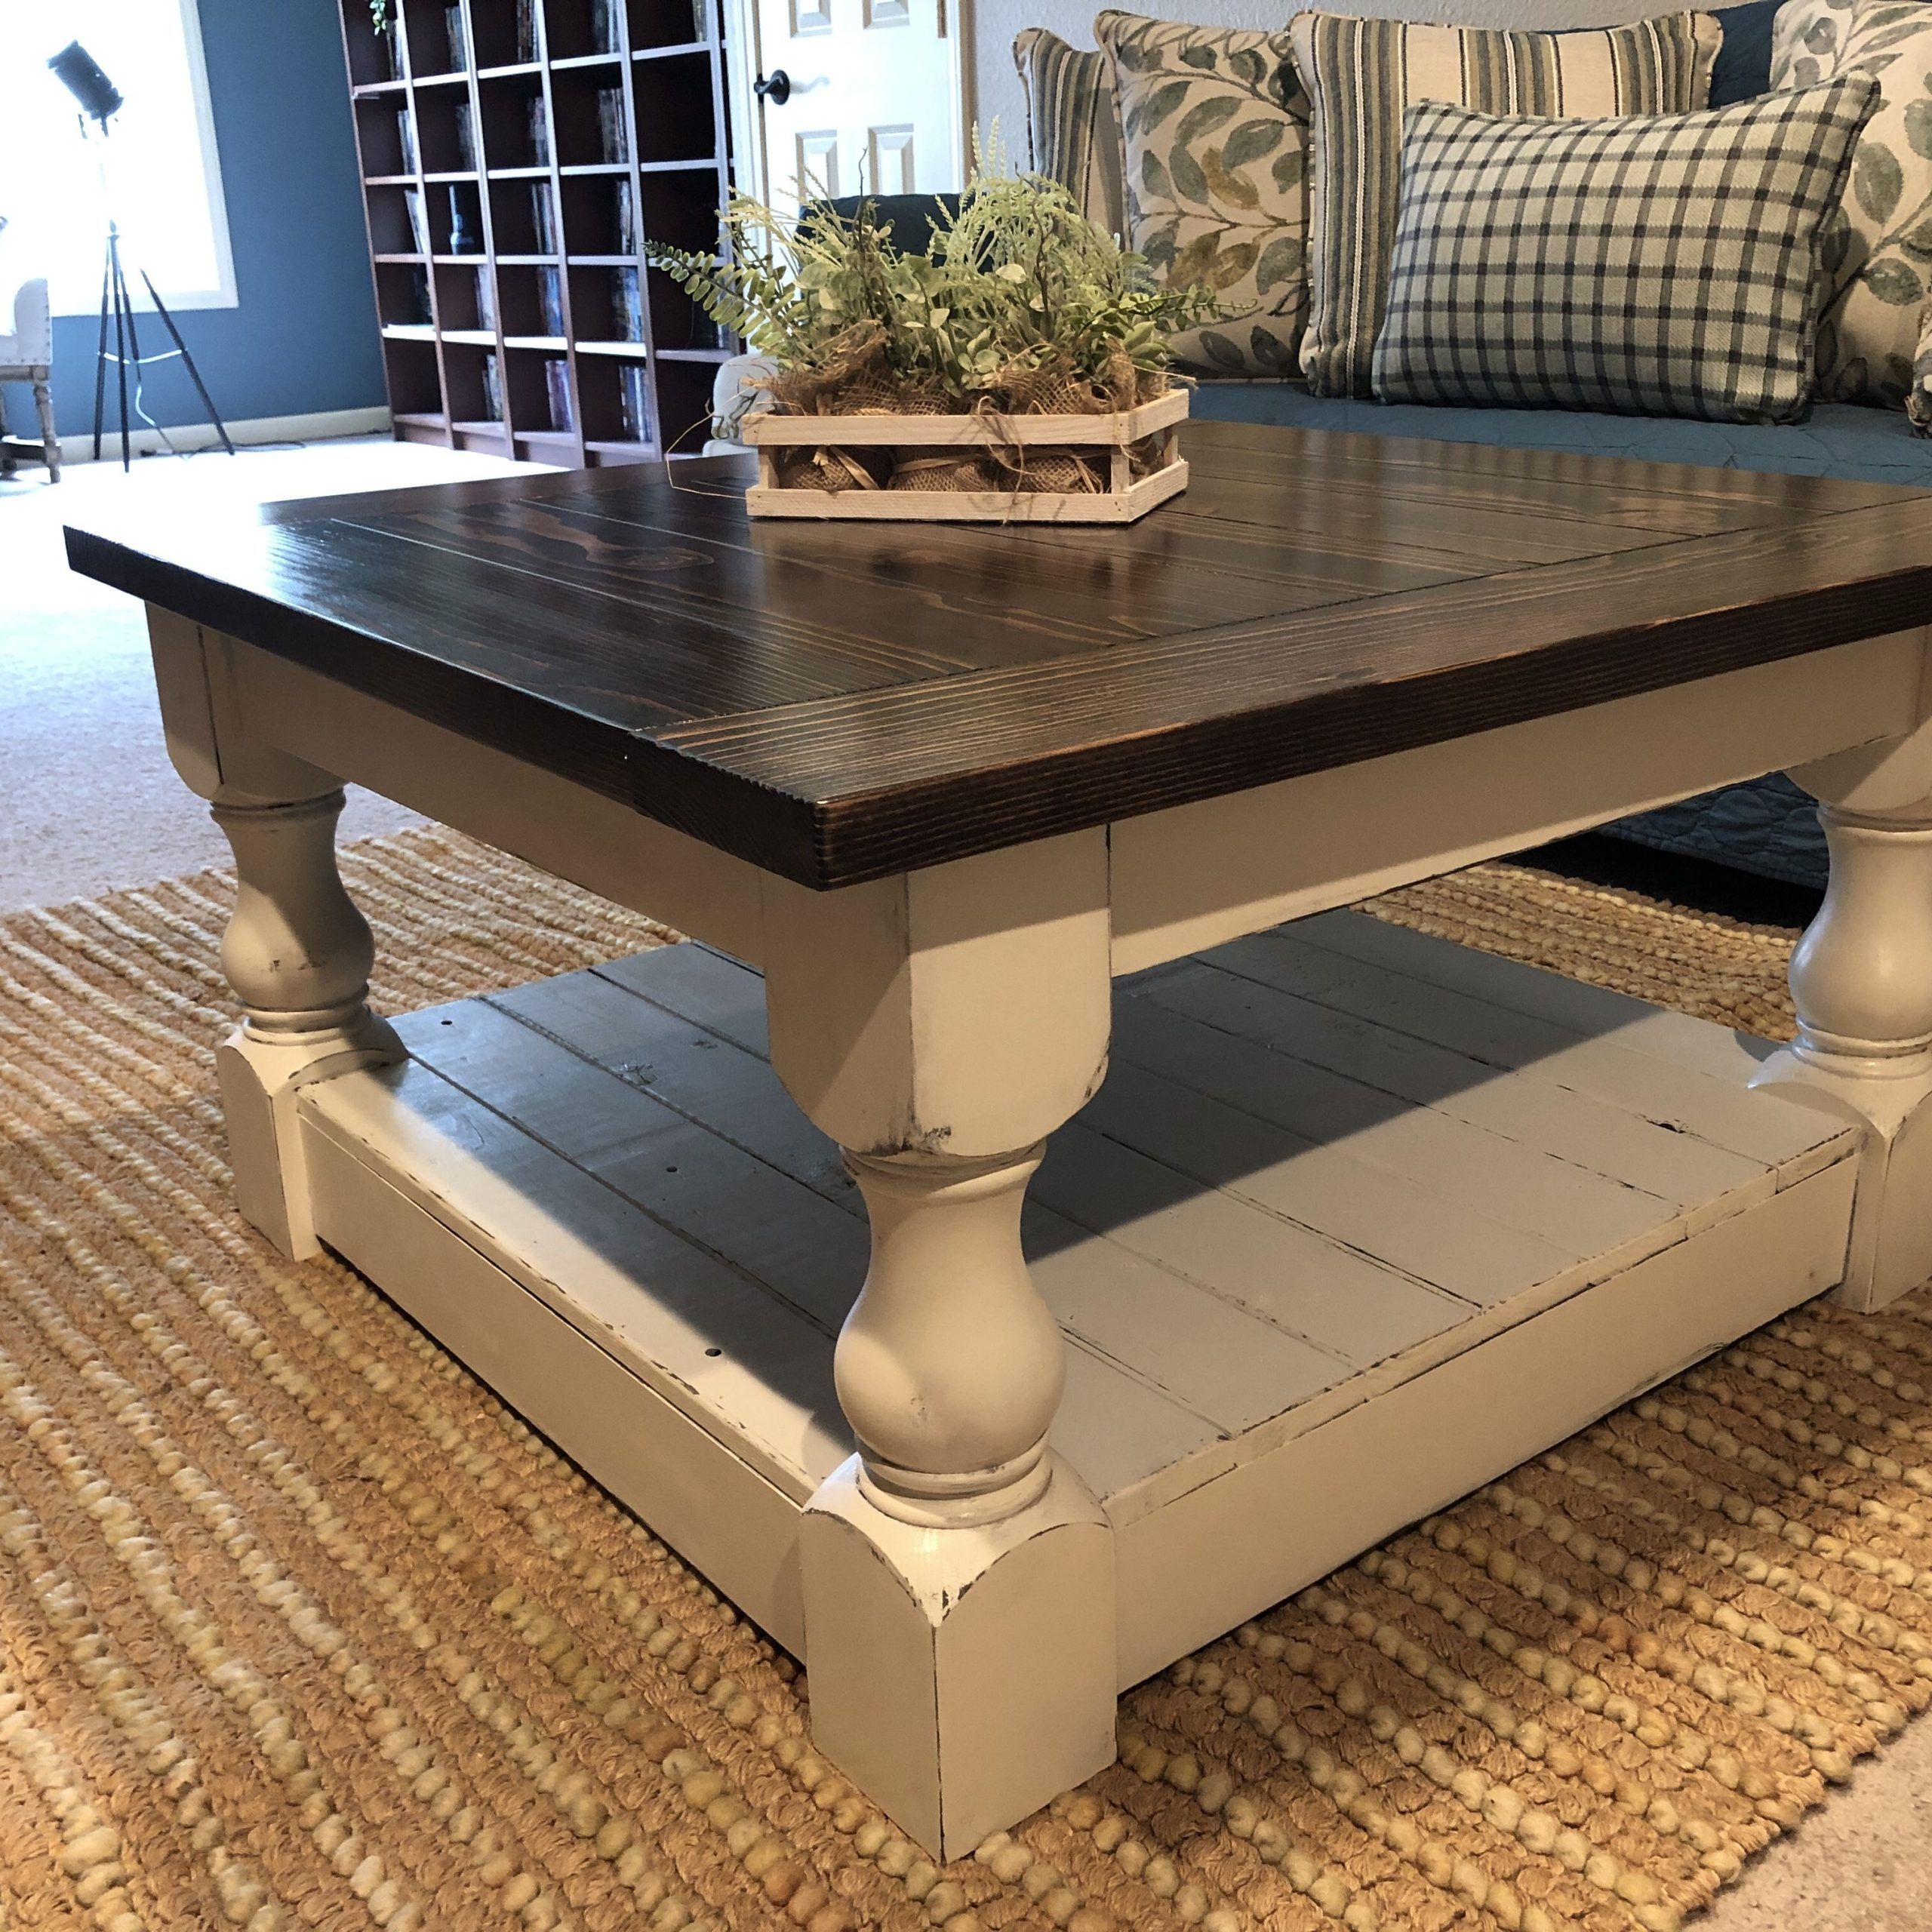 2020 A Perfect Addition To Your Home: The Farmhouse Rustic Coffee Table Regarding Living Room Farmhouse Coffee Tables (View 8 of 15)